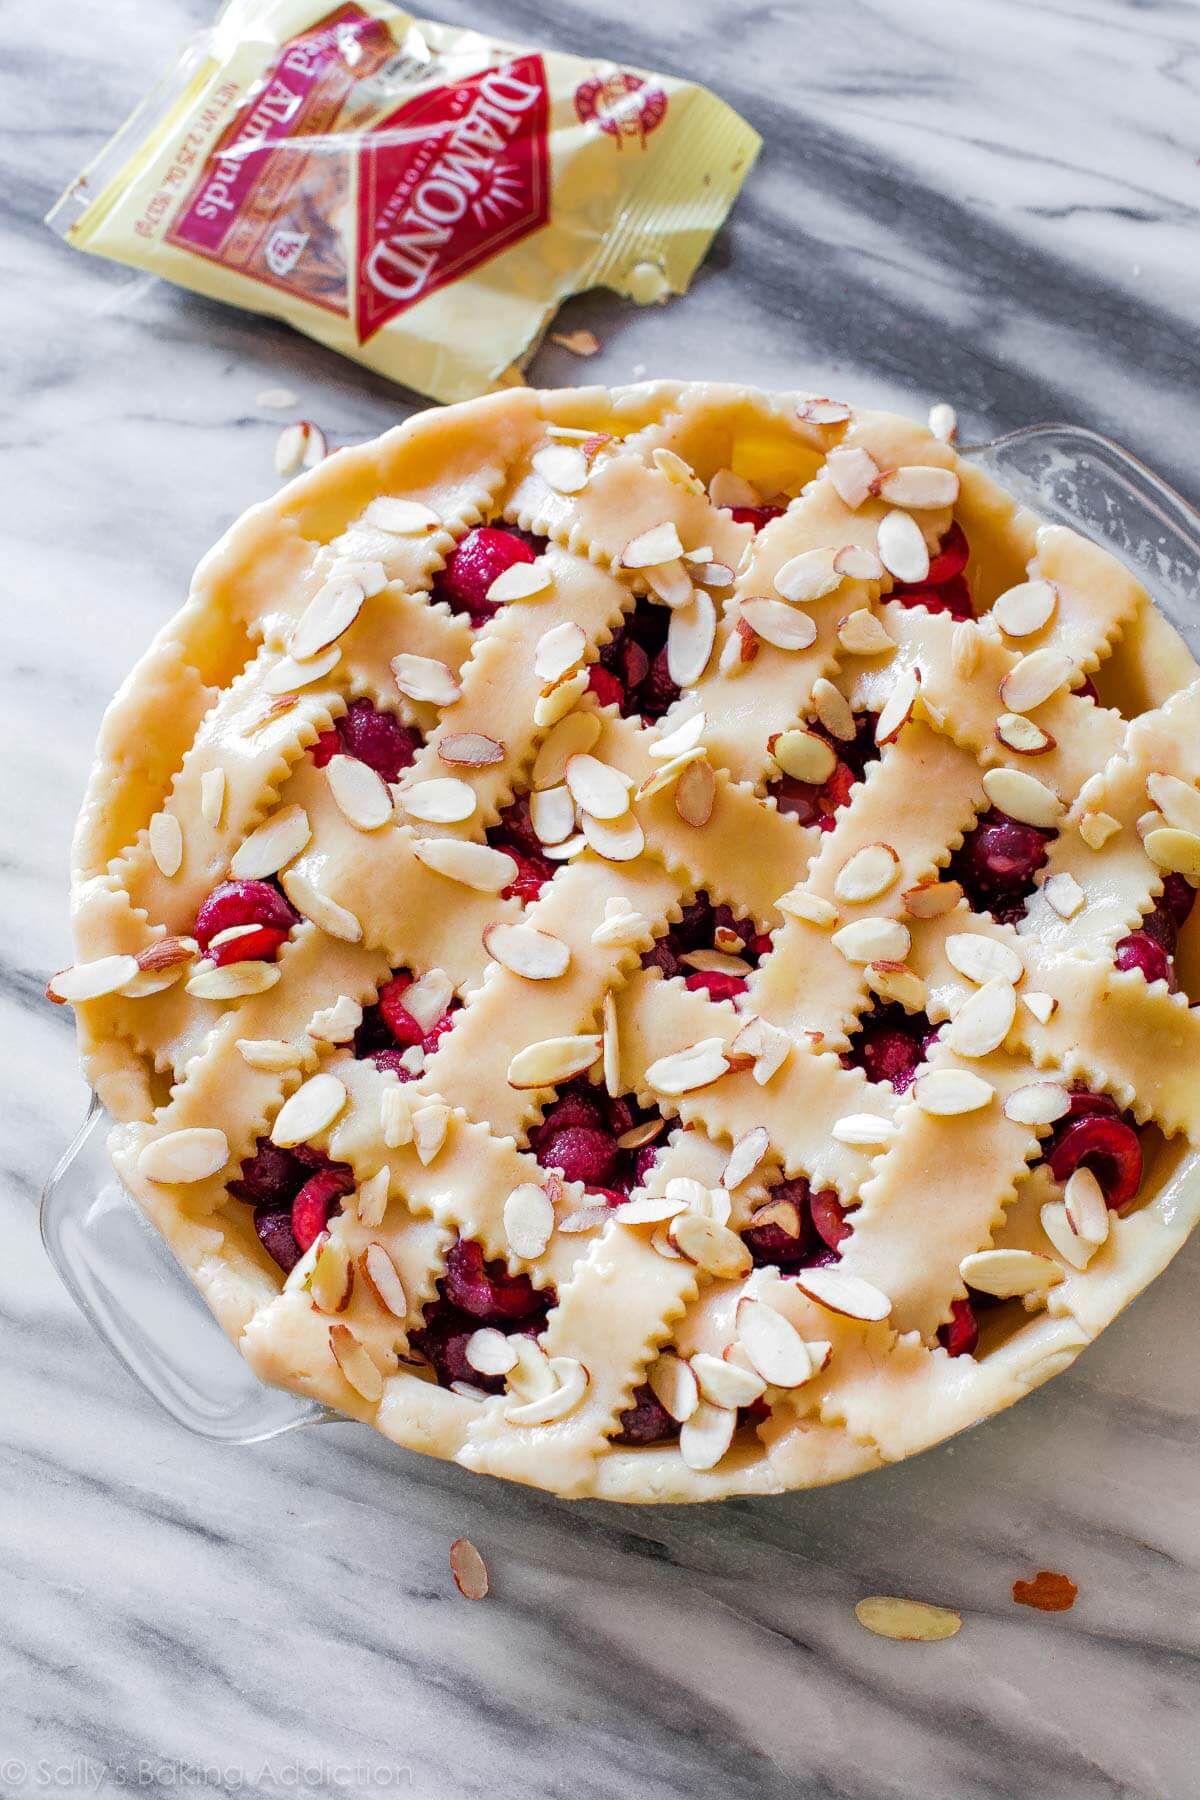 cherry pie with lattice pie dough and topped with toasted almonds before baking